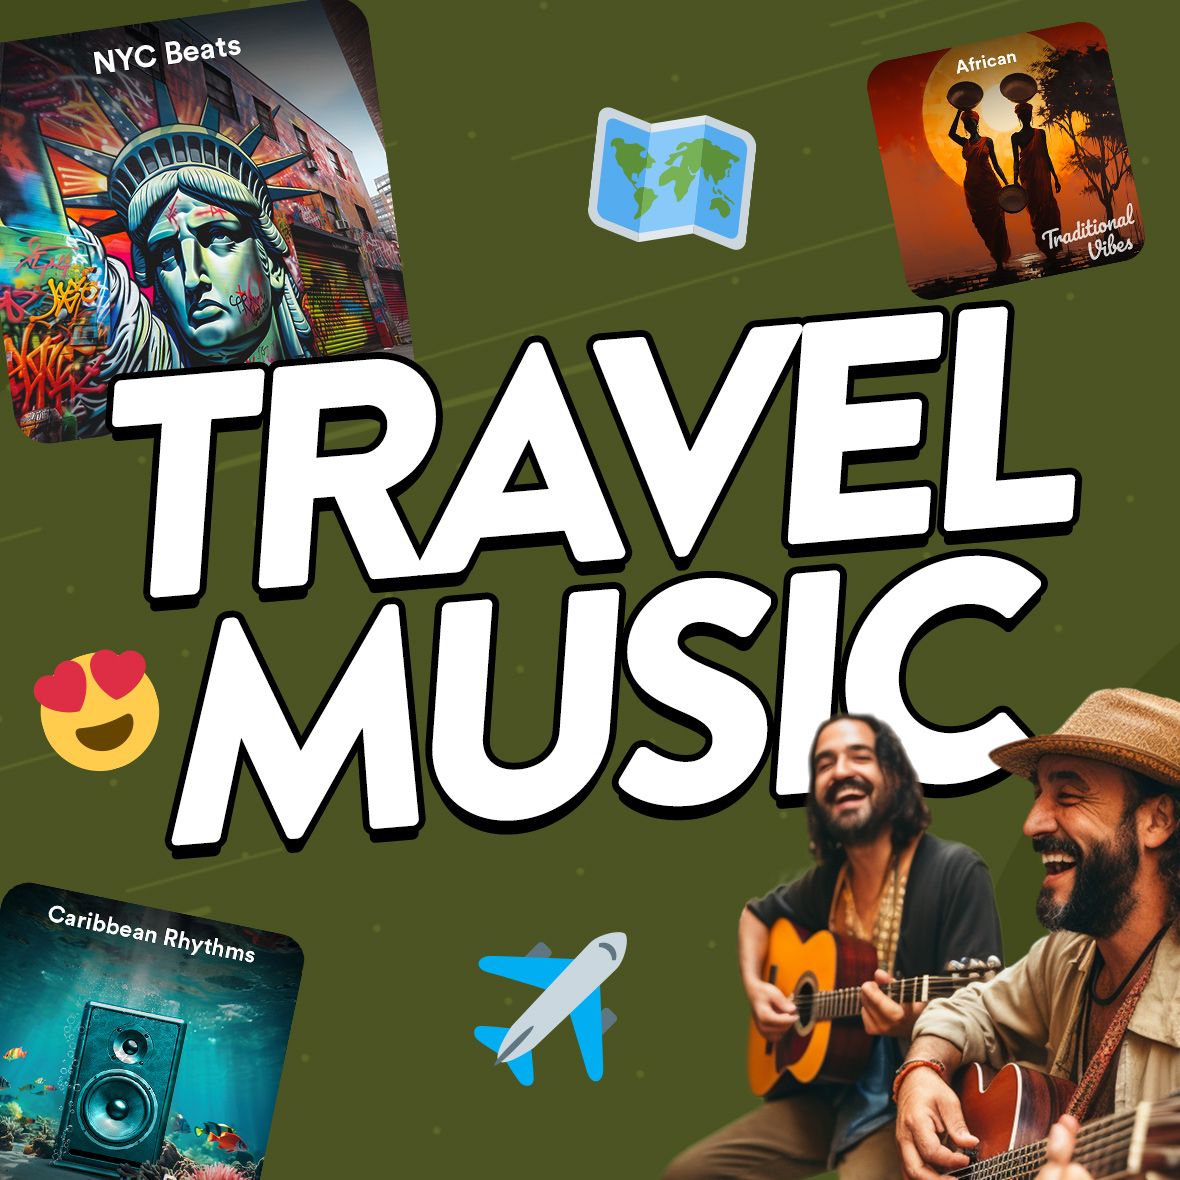 Images of Uppbeat travel music playlist tiles with large text saying 'Travel Music.'